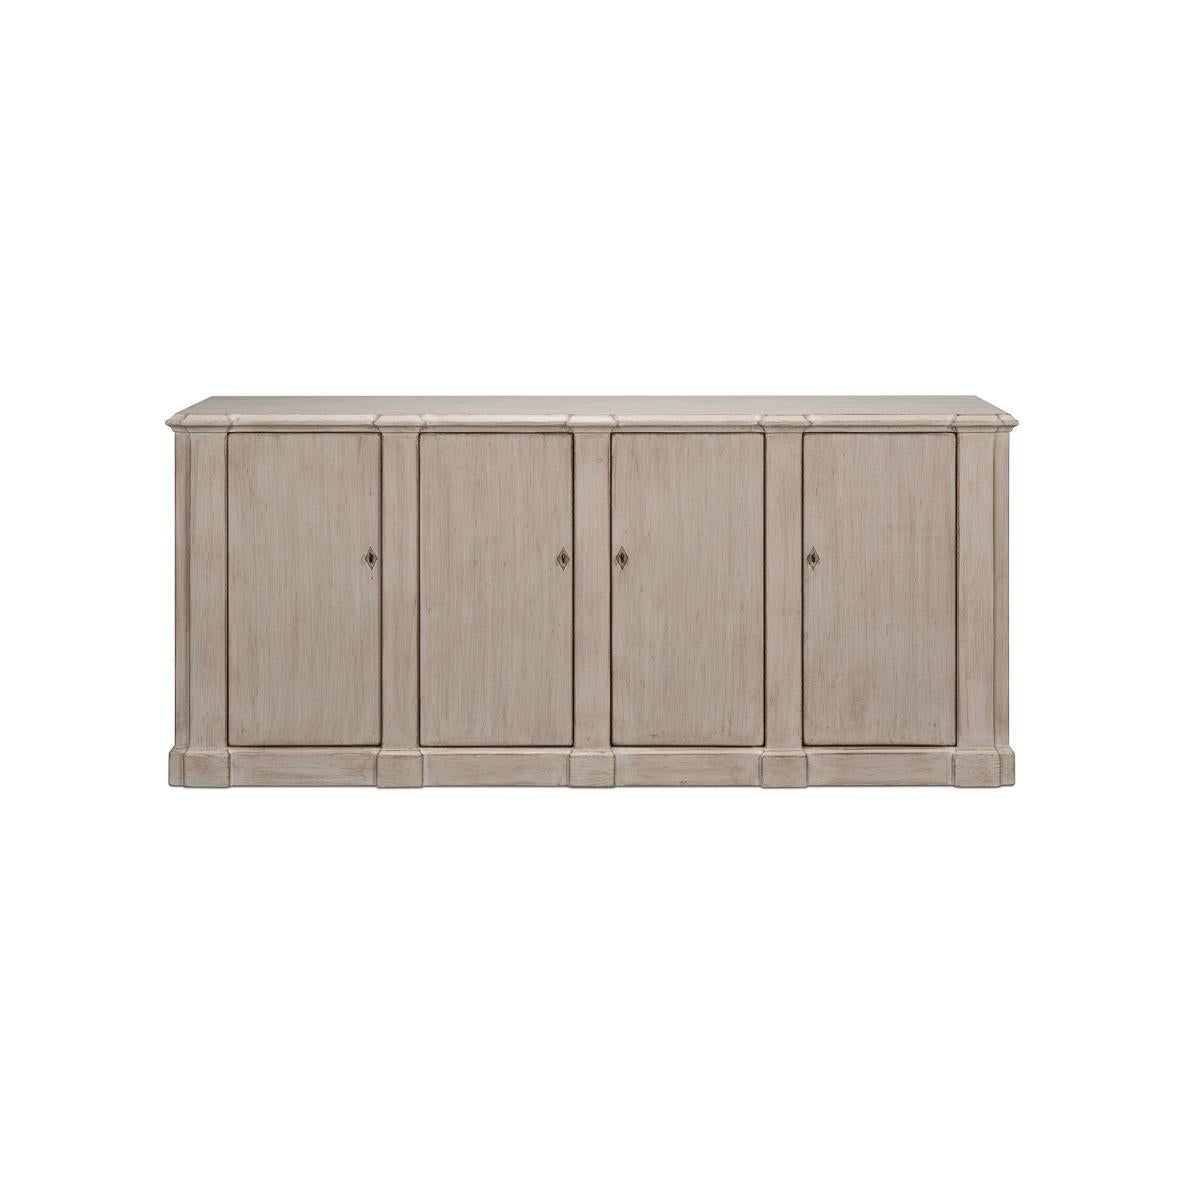 This piece captures the romantic essence of country style with its distressed stone gray finish and vintage charm. The sideboard's generous length, accented by four doors that open to a fitted interior with removable shelves, offers substantial